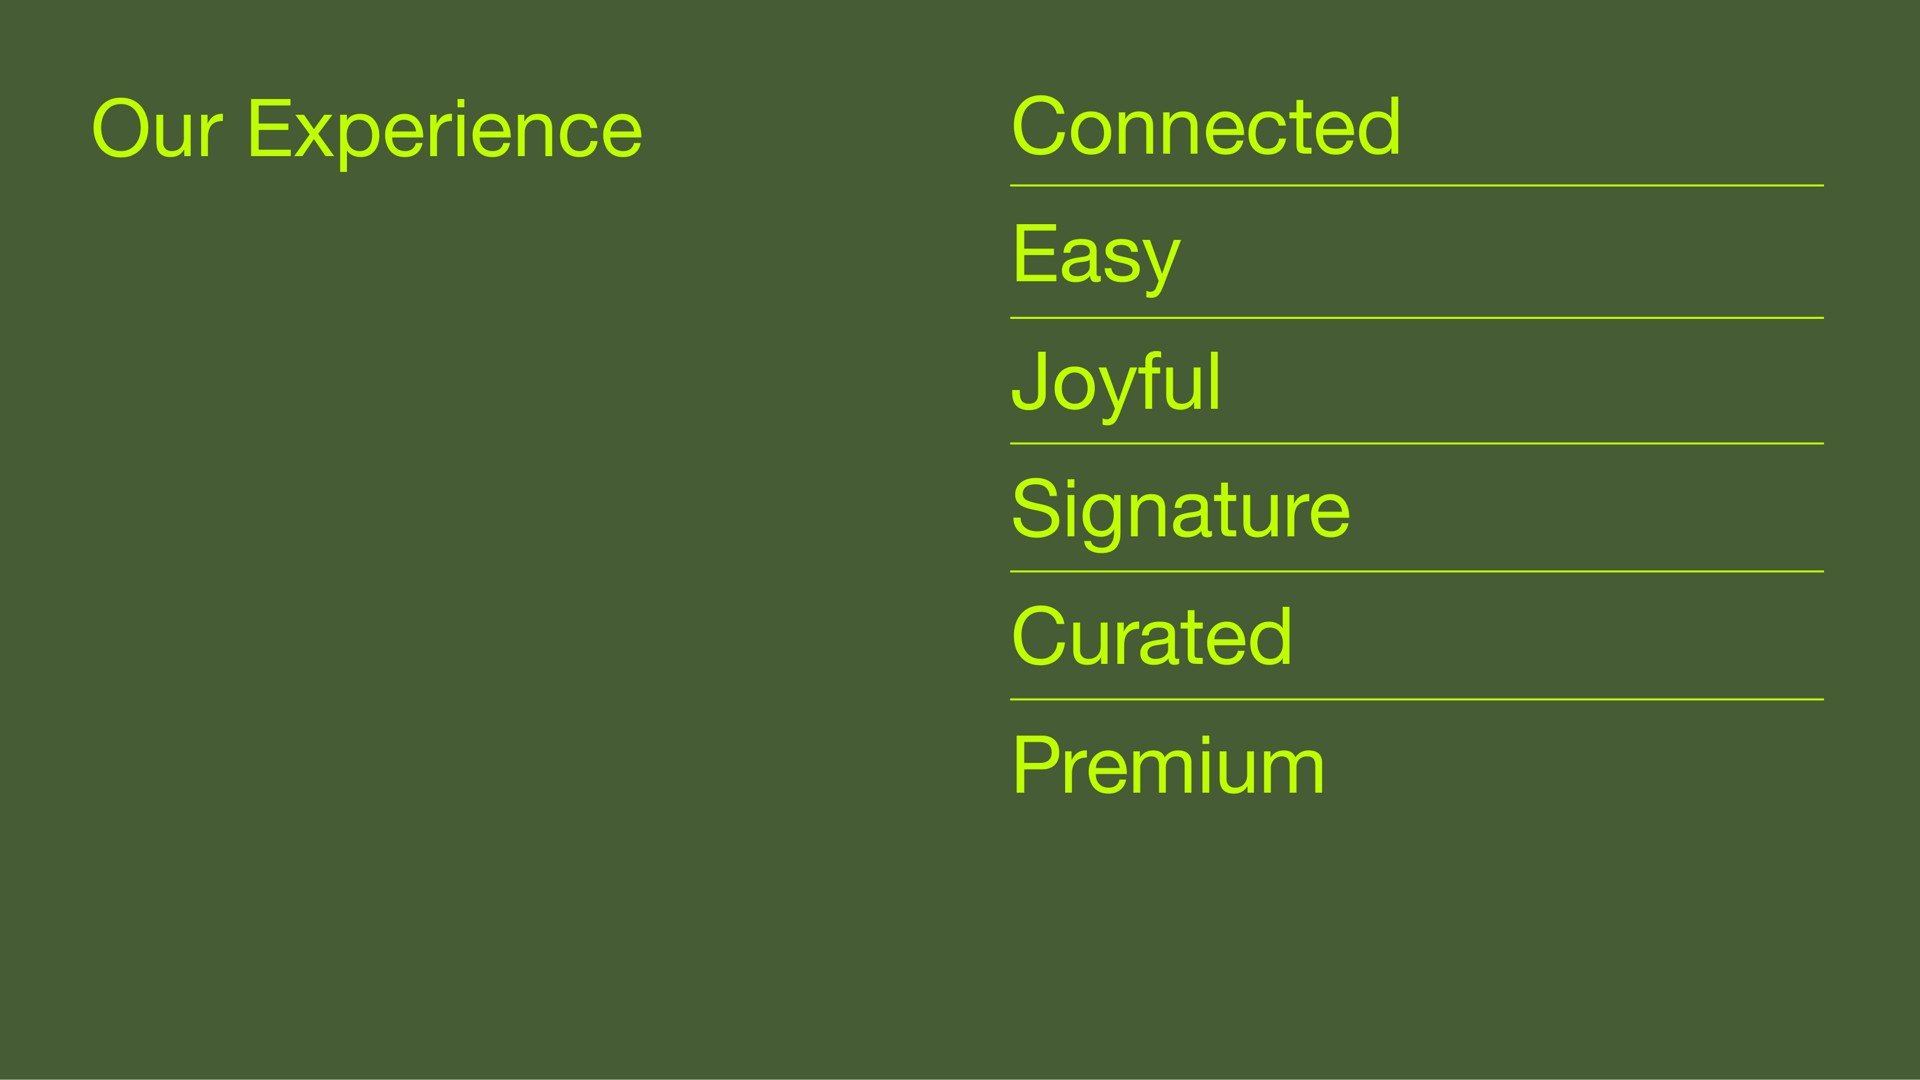 our experience connected easy joyful signature premium our experience easy joyful signature premium connected | Sonos